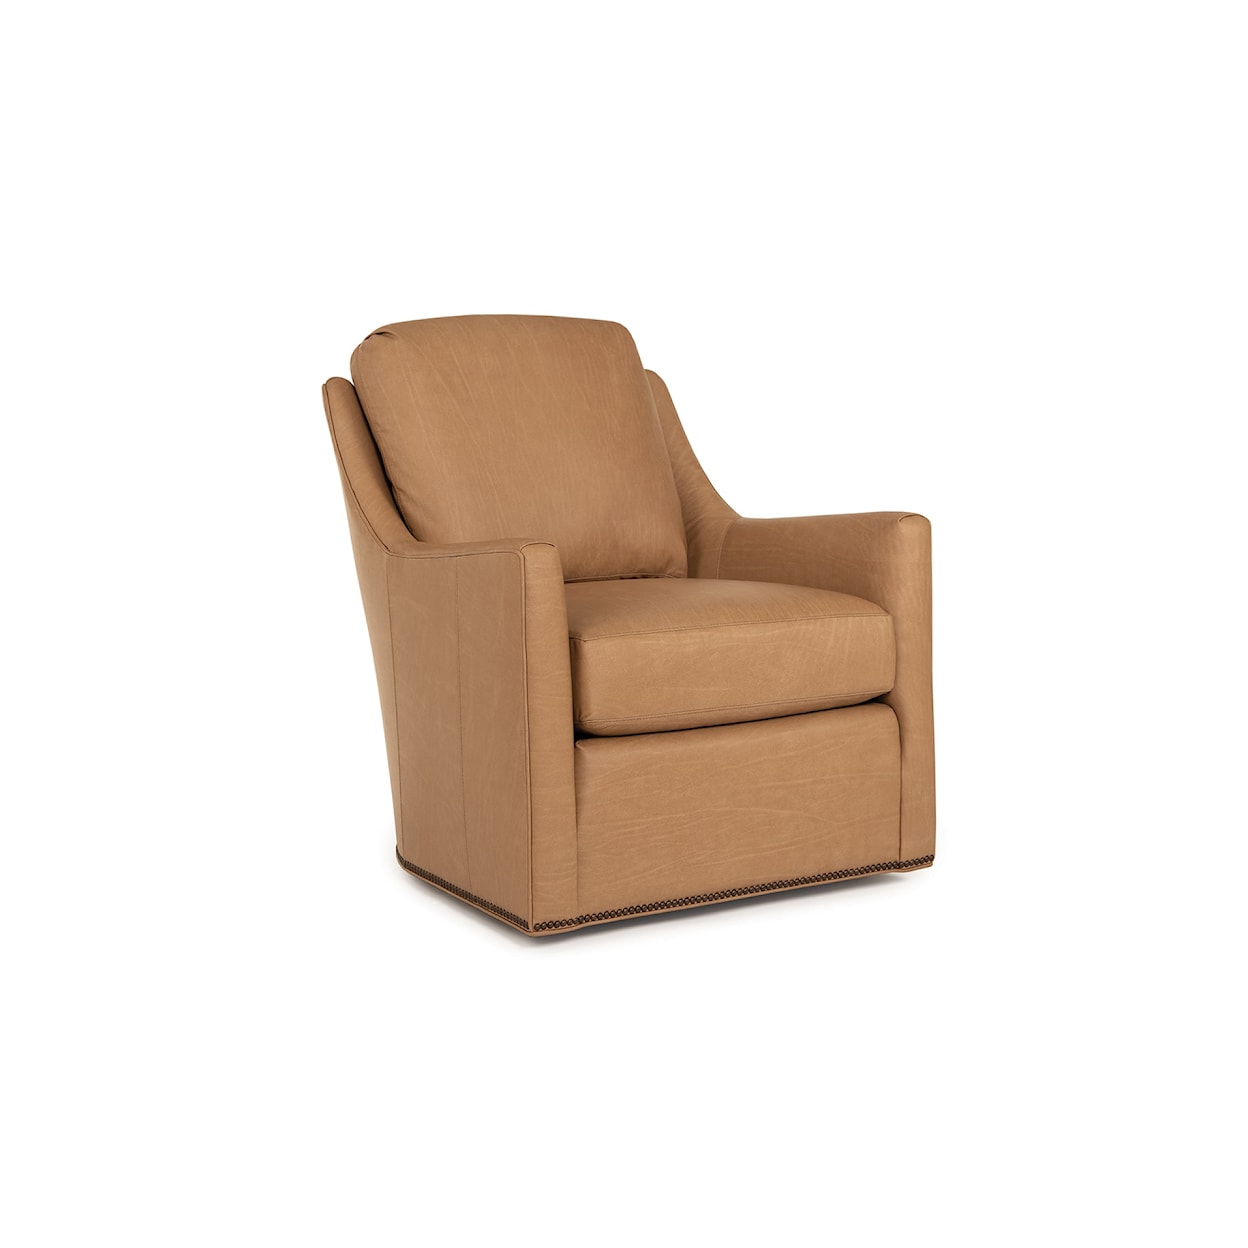 Smith Brothers 560 Swivel Glider Chair